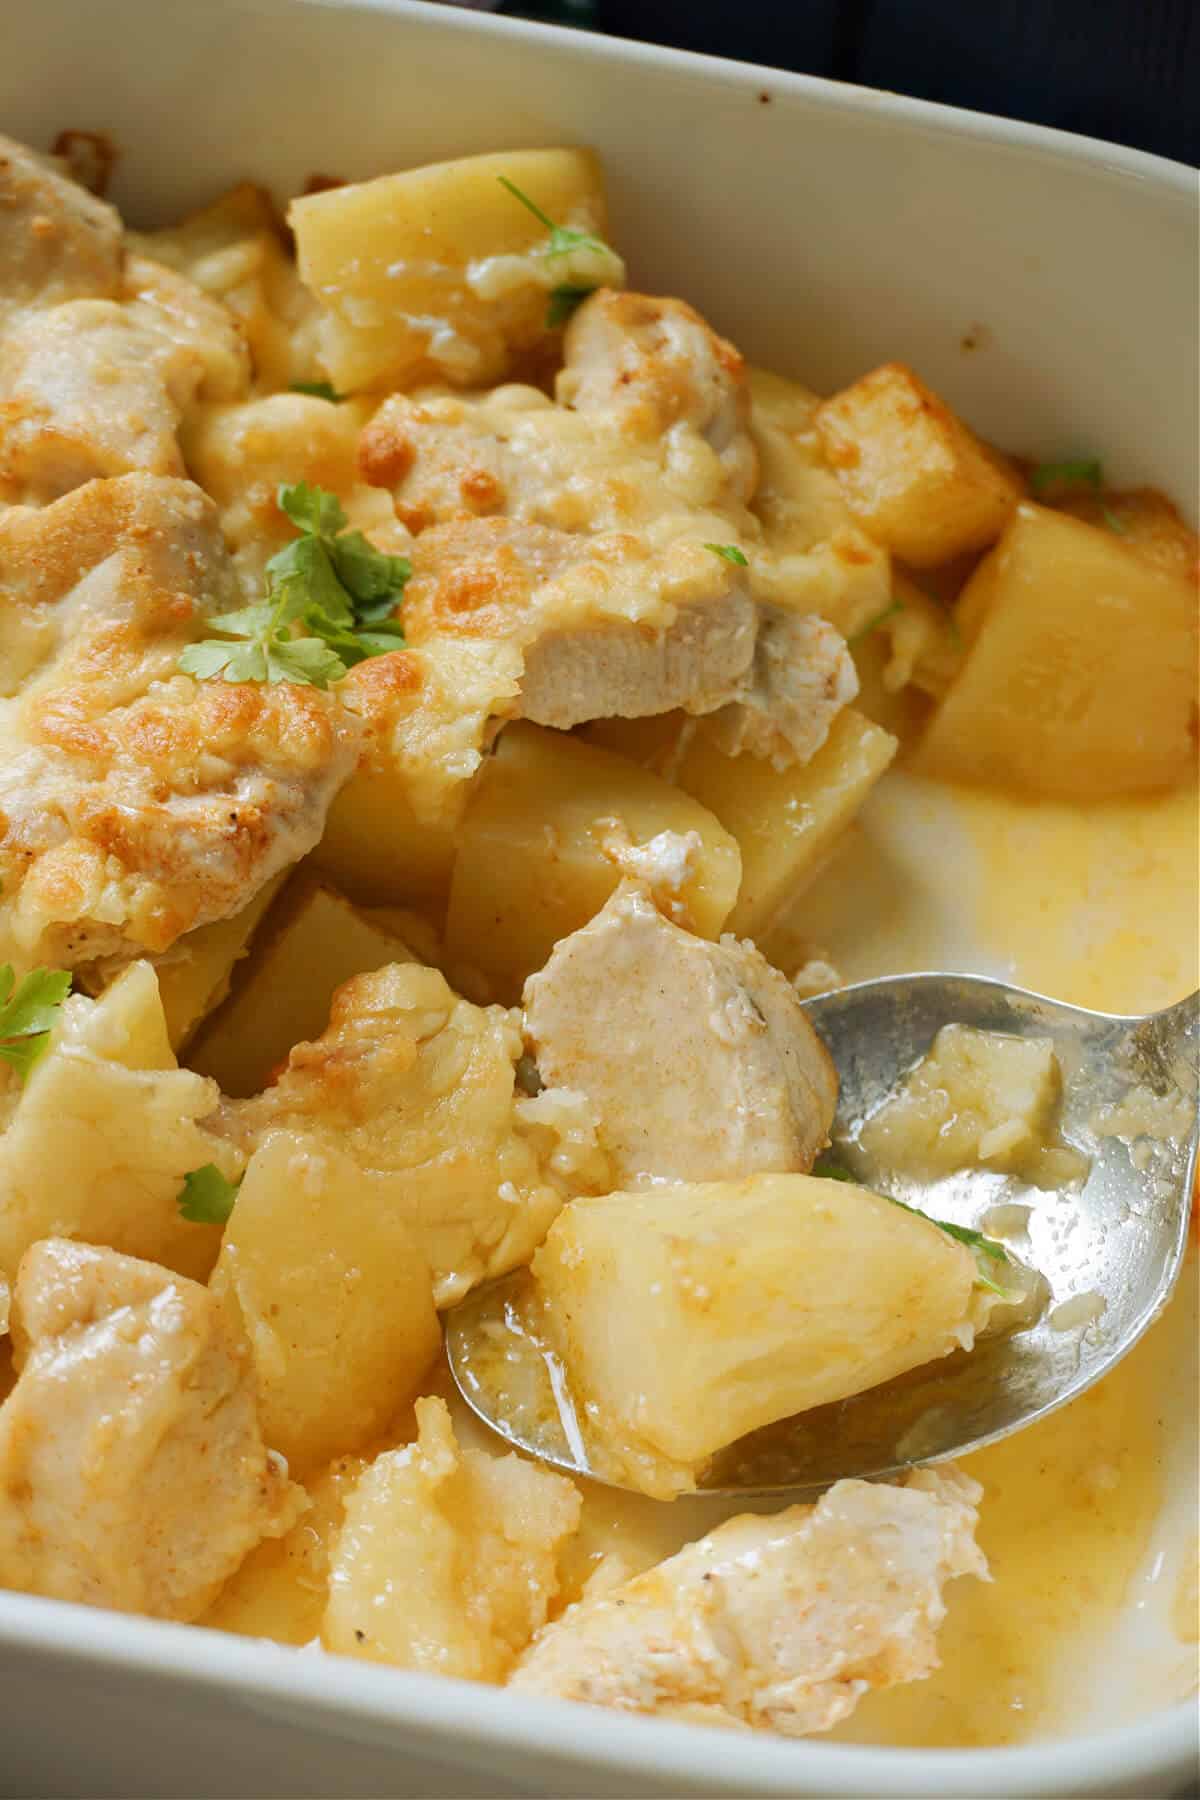 A dish with chicken and potato pieces and a spoon in it.